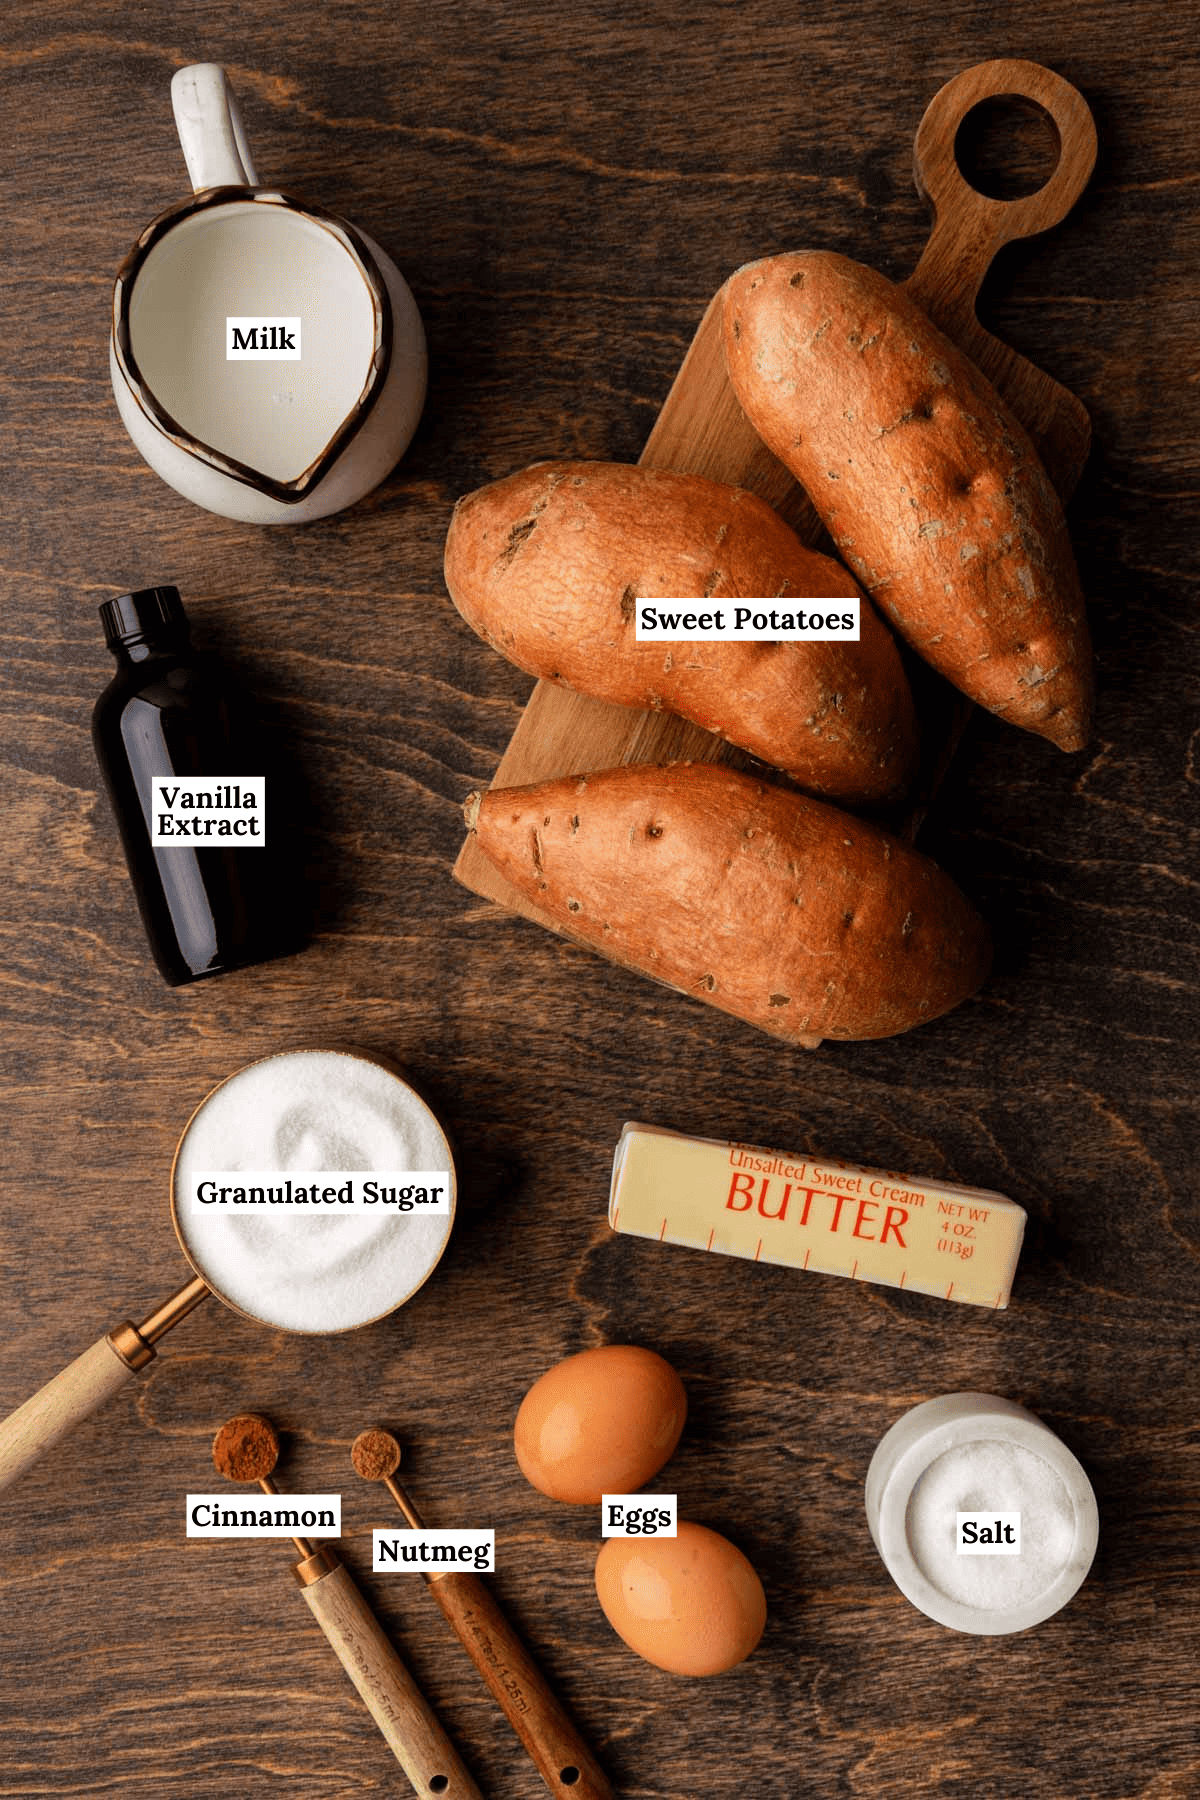 ingredients for sweet potato pie arranged on a wood surface including whole sweet potatoes, milk, vanilla extract, granulated sugar, butter, eggs, salt, nutmeg and cinnamon